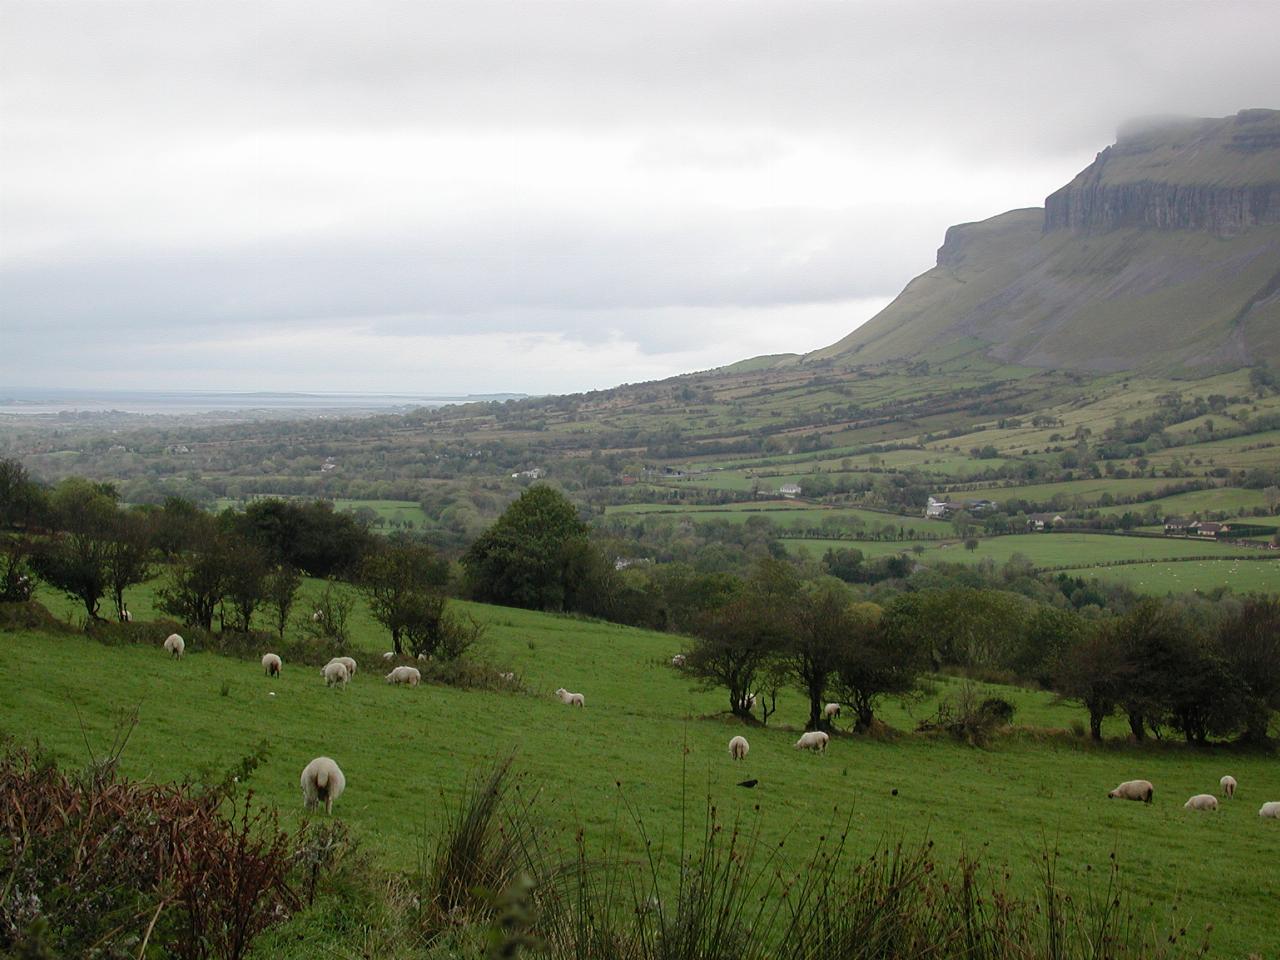 Drumcliff River Valley & Glencar Lake just east of Sligo, Eire and Benbullen - the mountain at the far left end